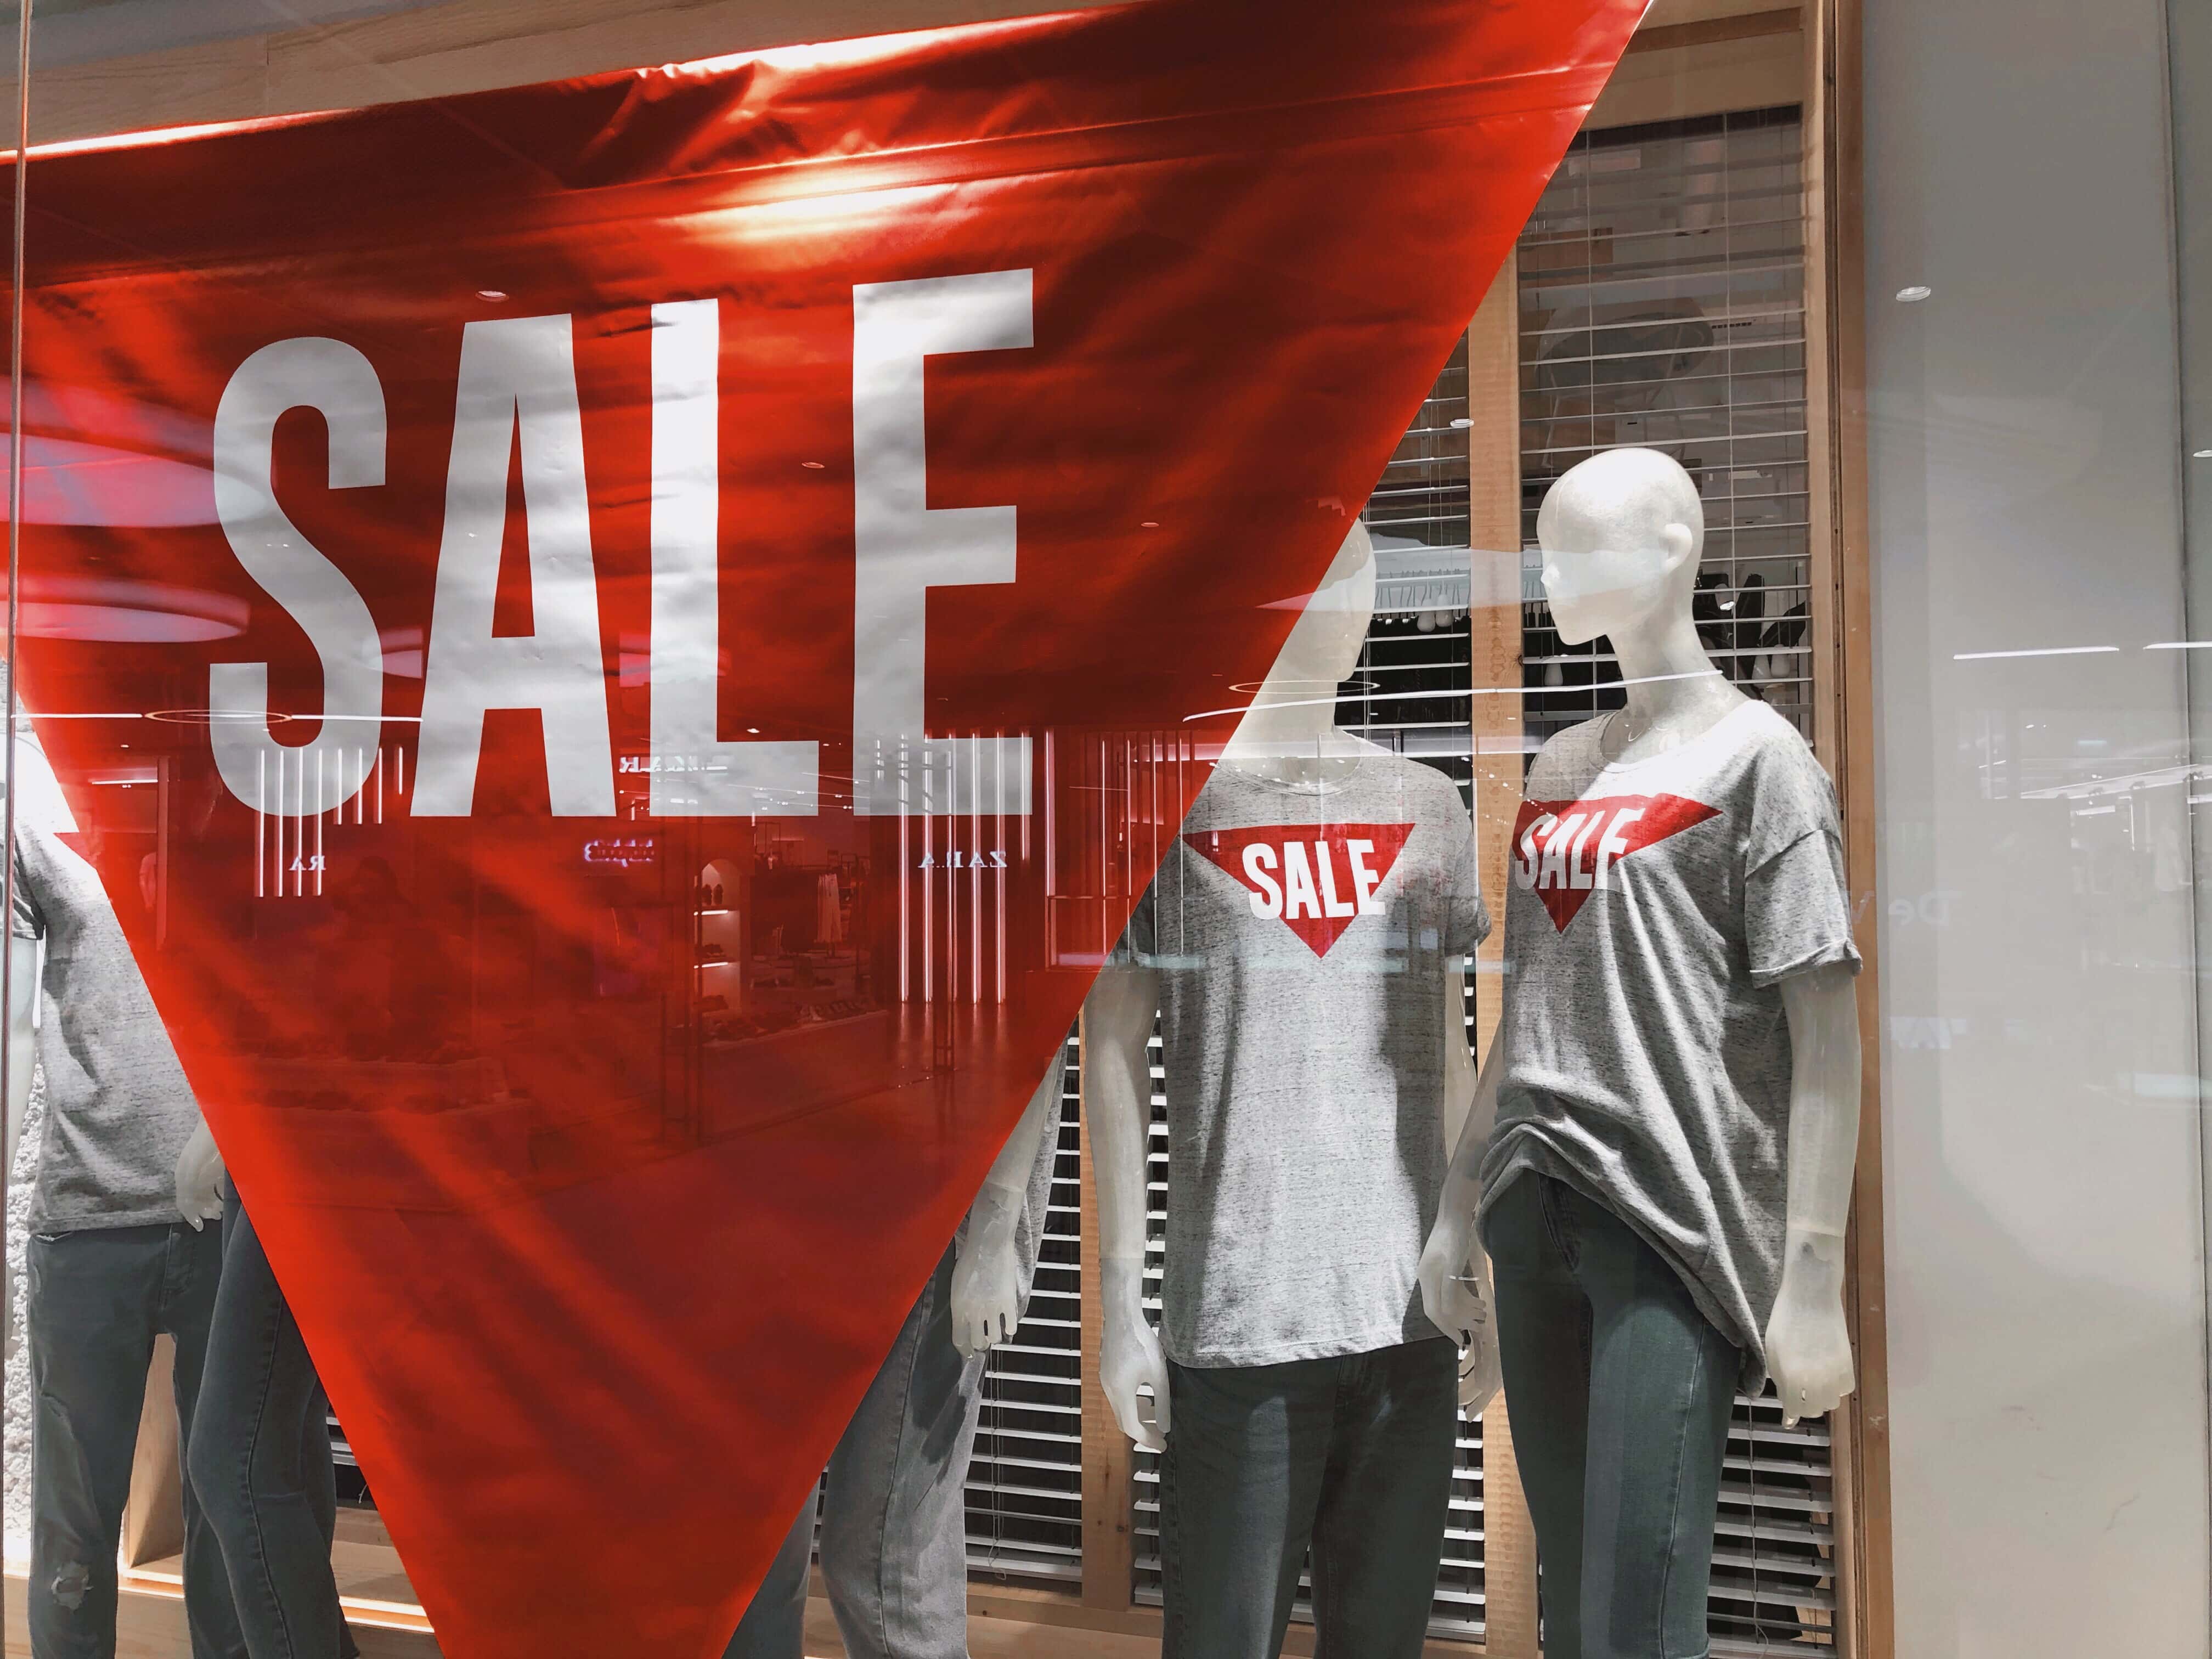 Boxing Day marketing tips, a large sale banner and mannequins wearing sale t-shirts in a window display.